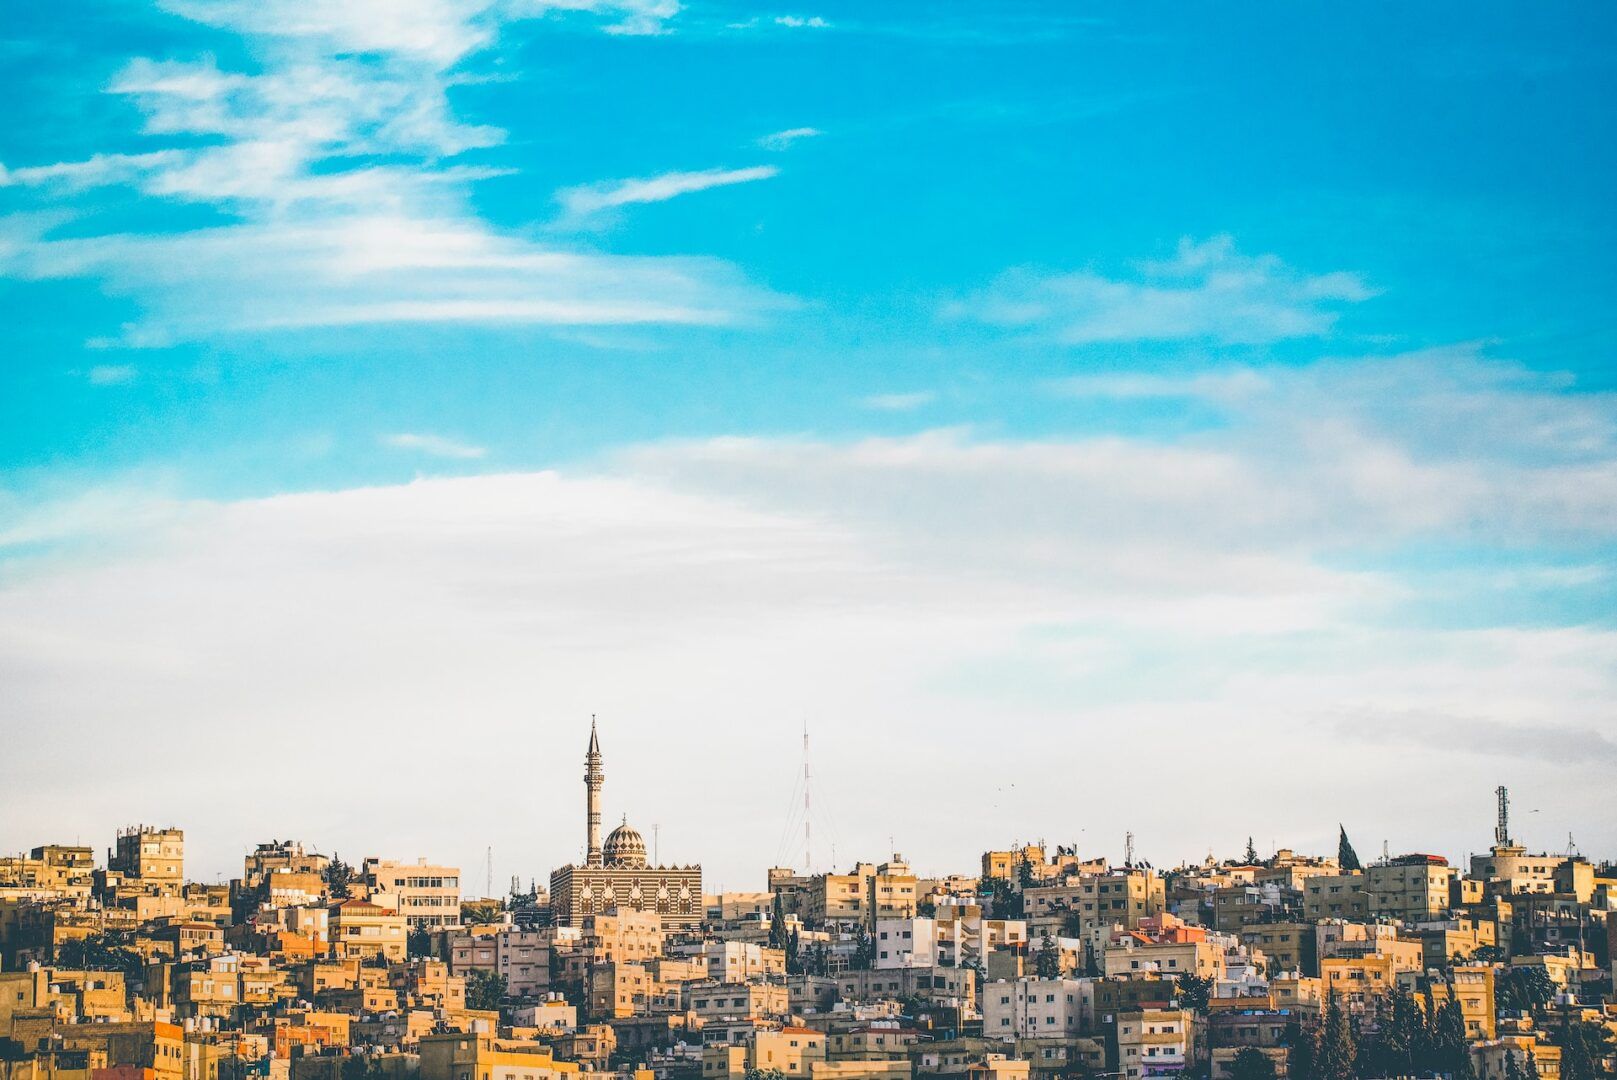 6 things to see in Amman, the capital of Jordan